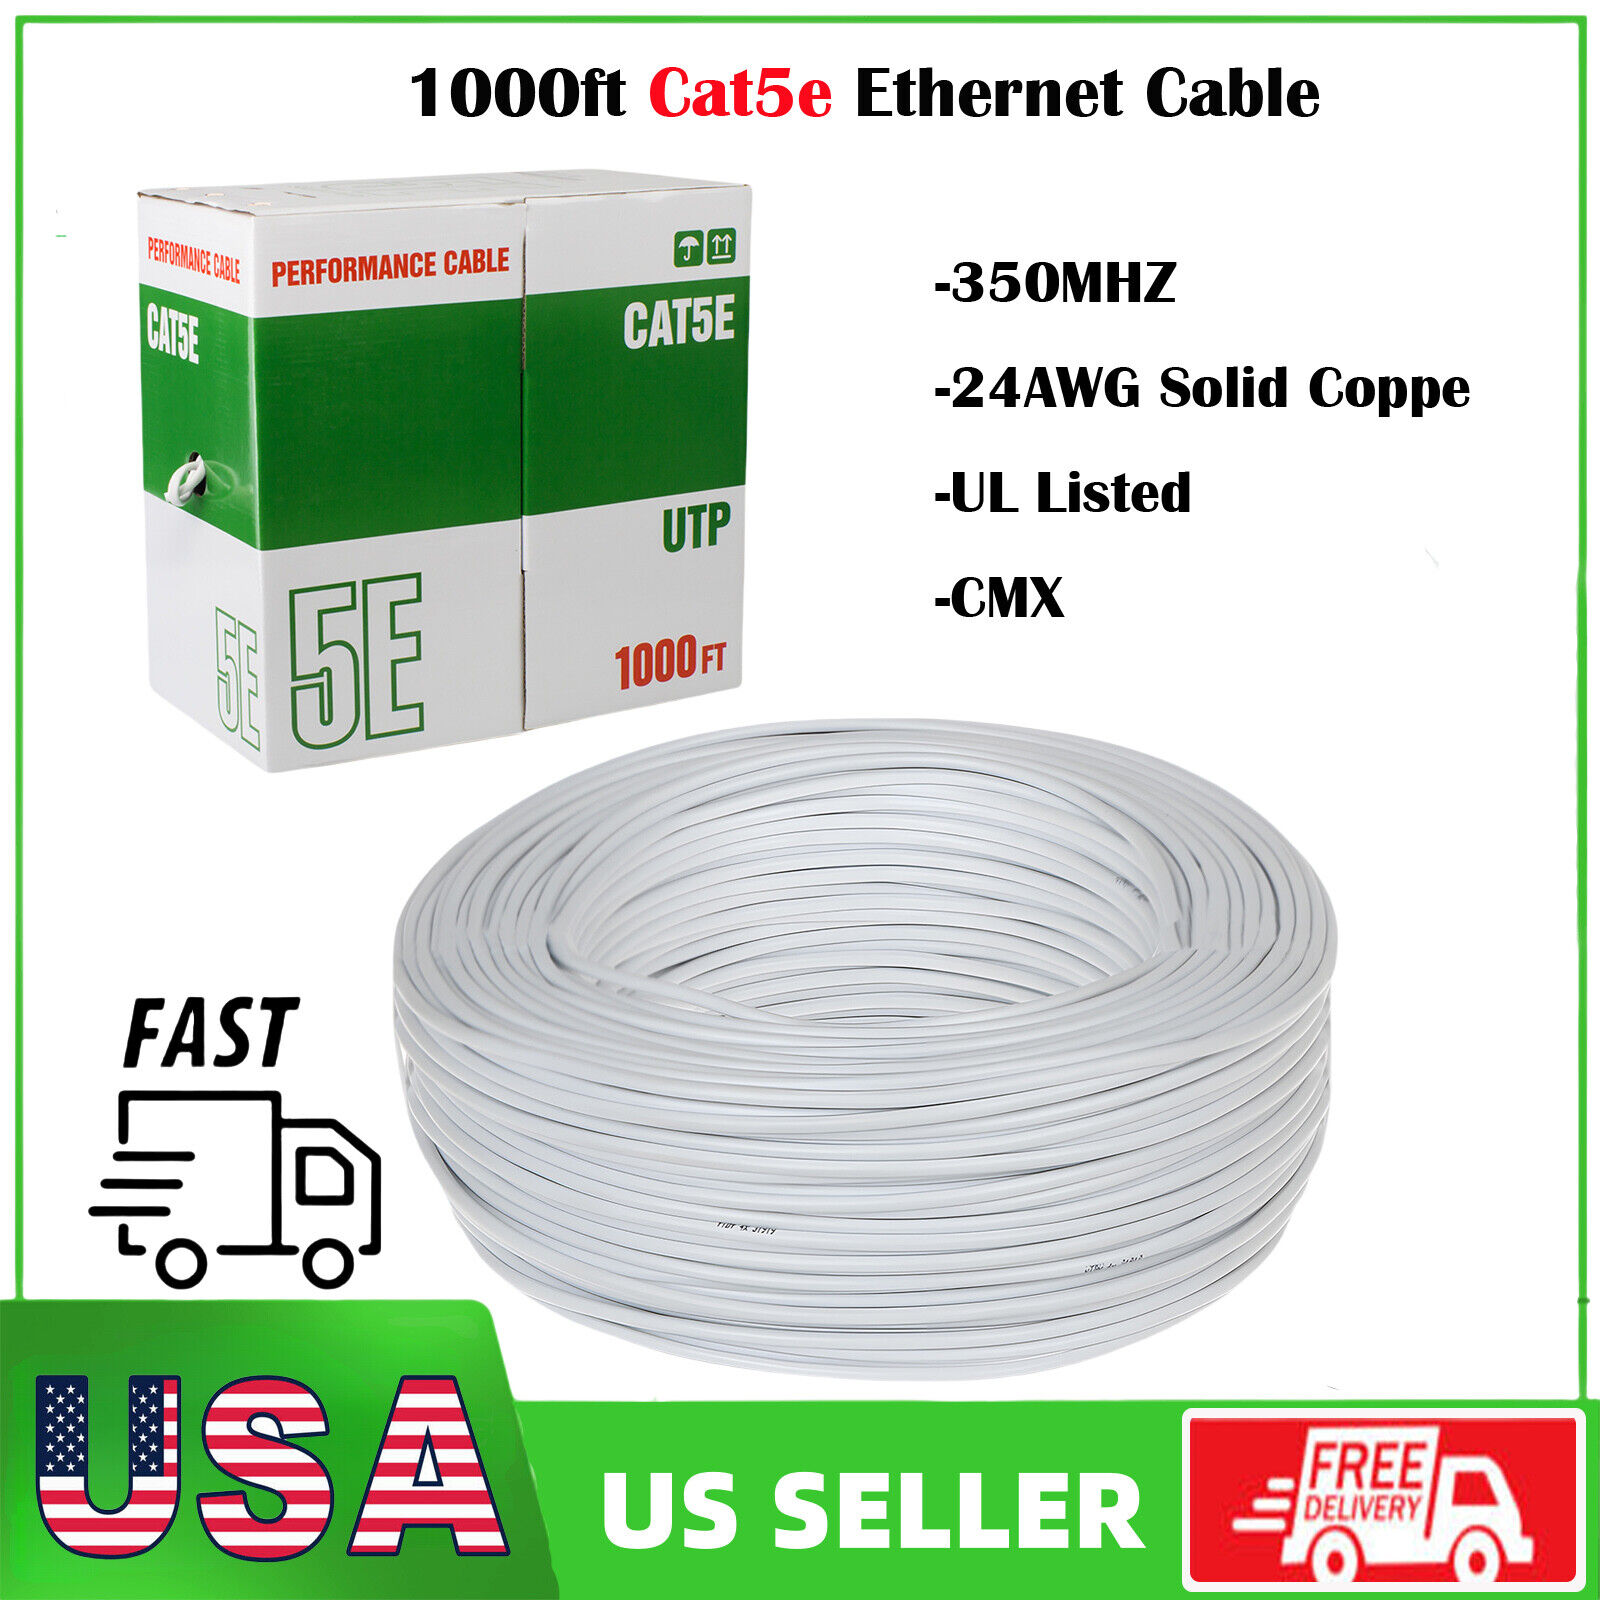 Cat6/Cat5e 1000ft Outdoor/Indoor Ethernet Cable UTP 23AWG/24AWG Solid Coppe